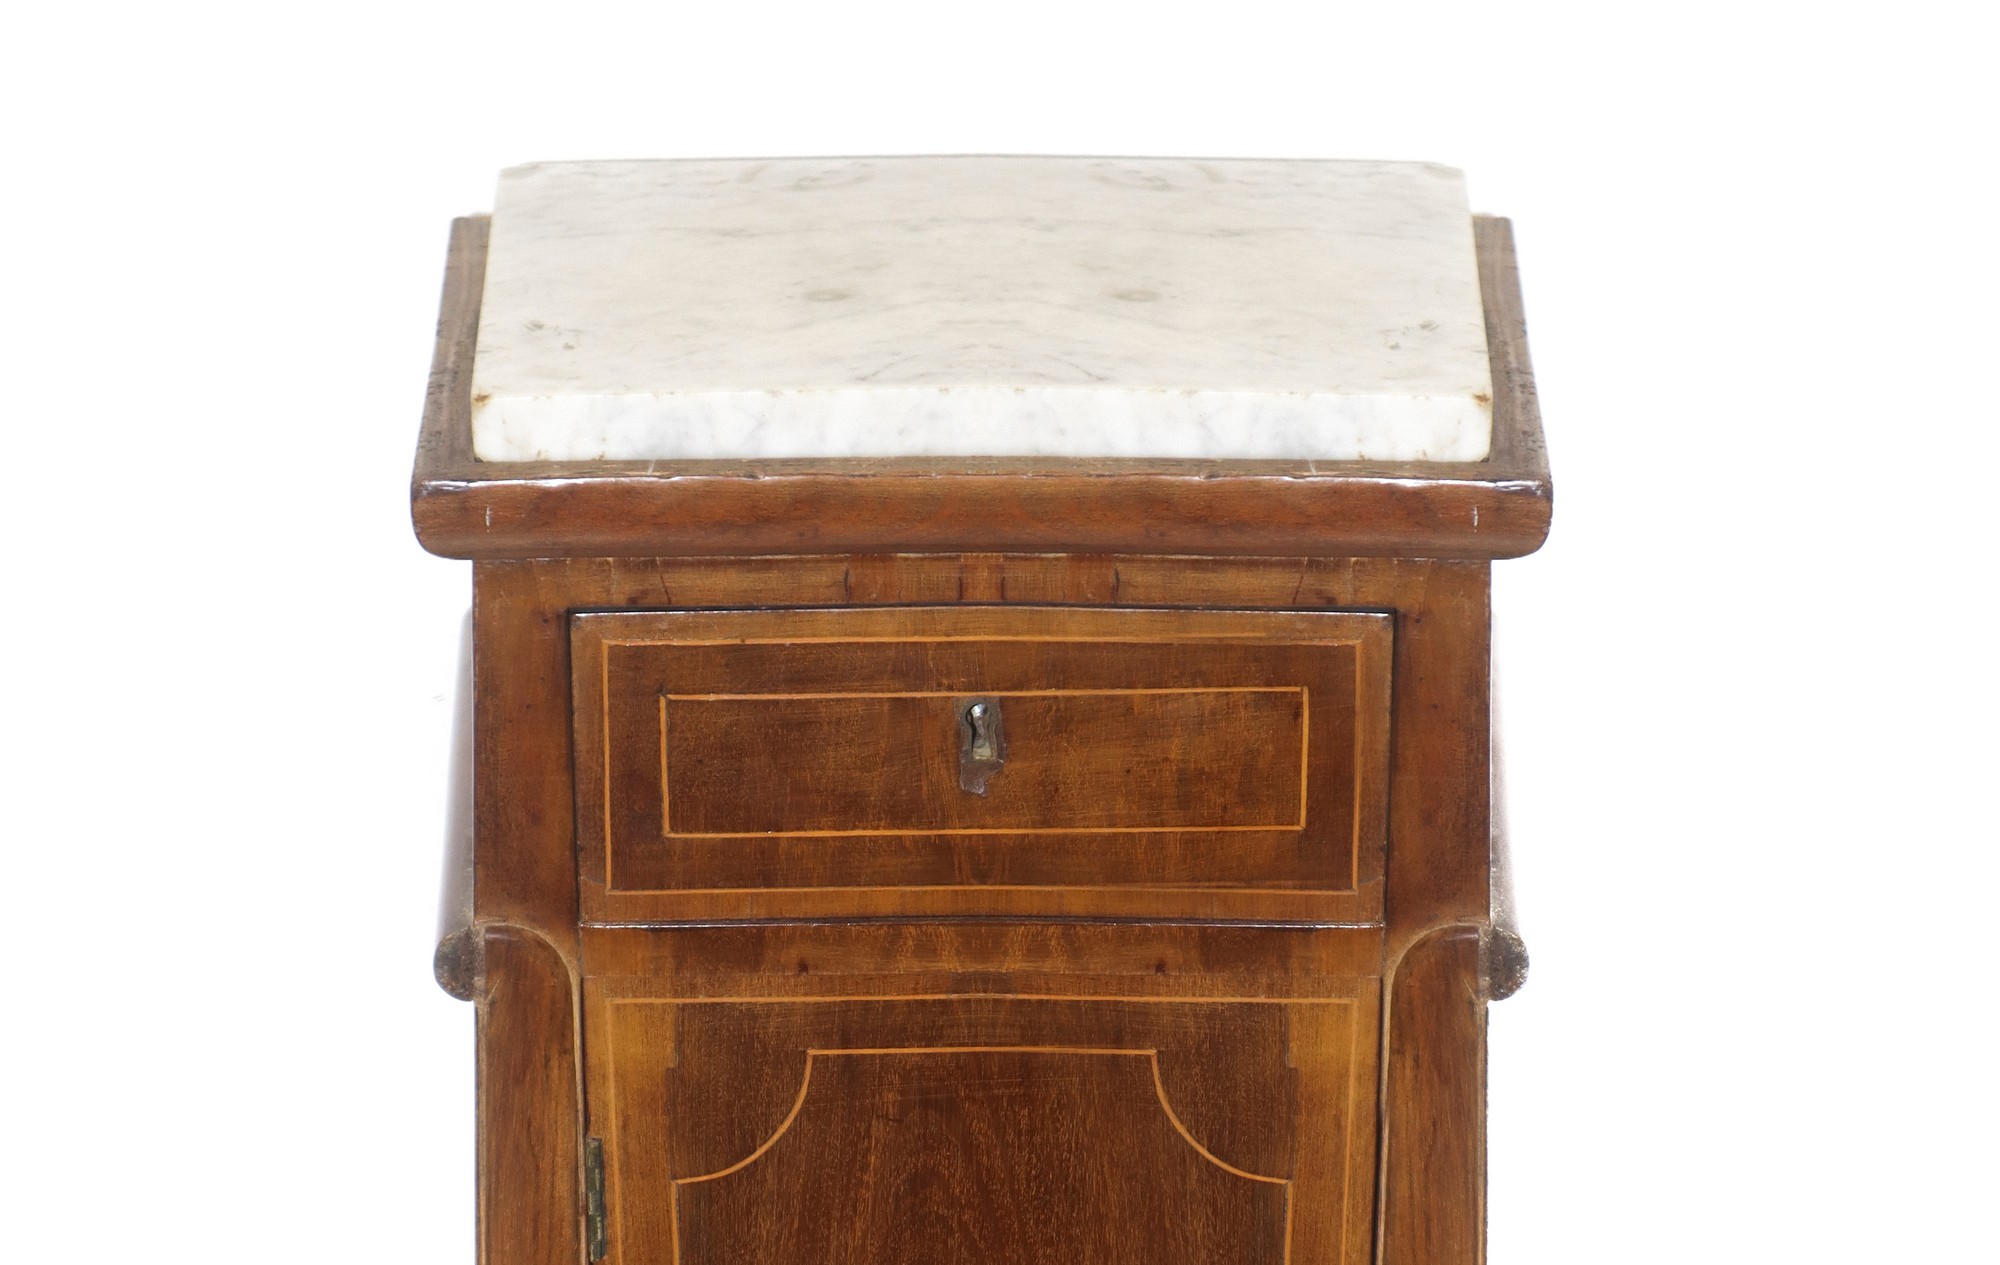 Pyramidal trunk center bedside table in walnut wood, Sicily 19th century - Image 3 of 5